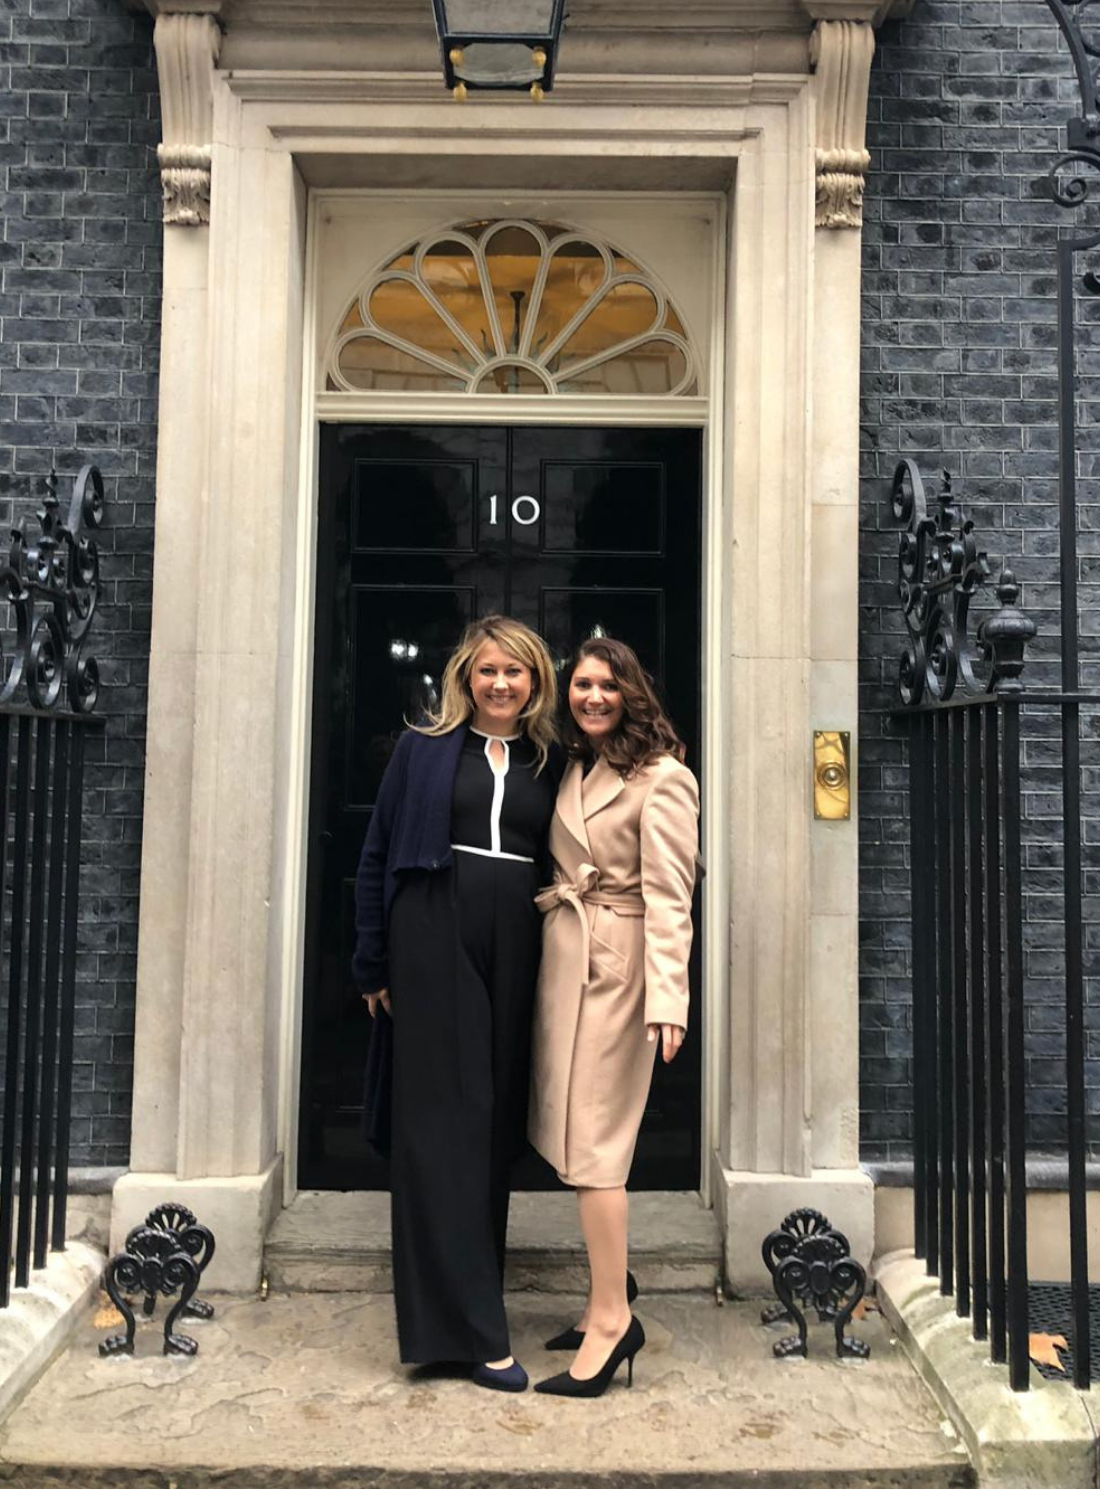 Laura and Diana outside 10 downing street on international women's day 